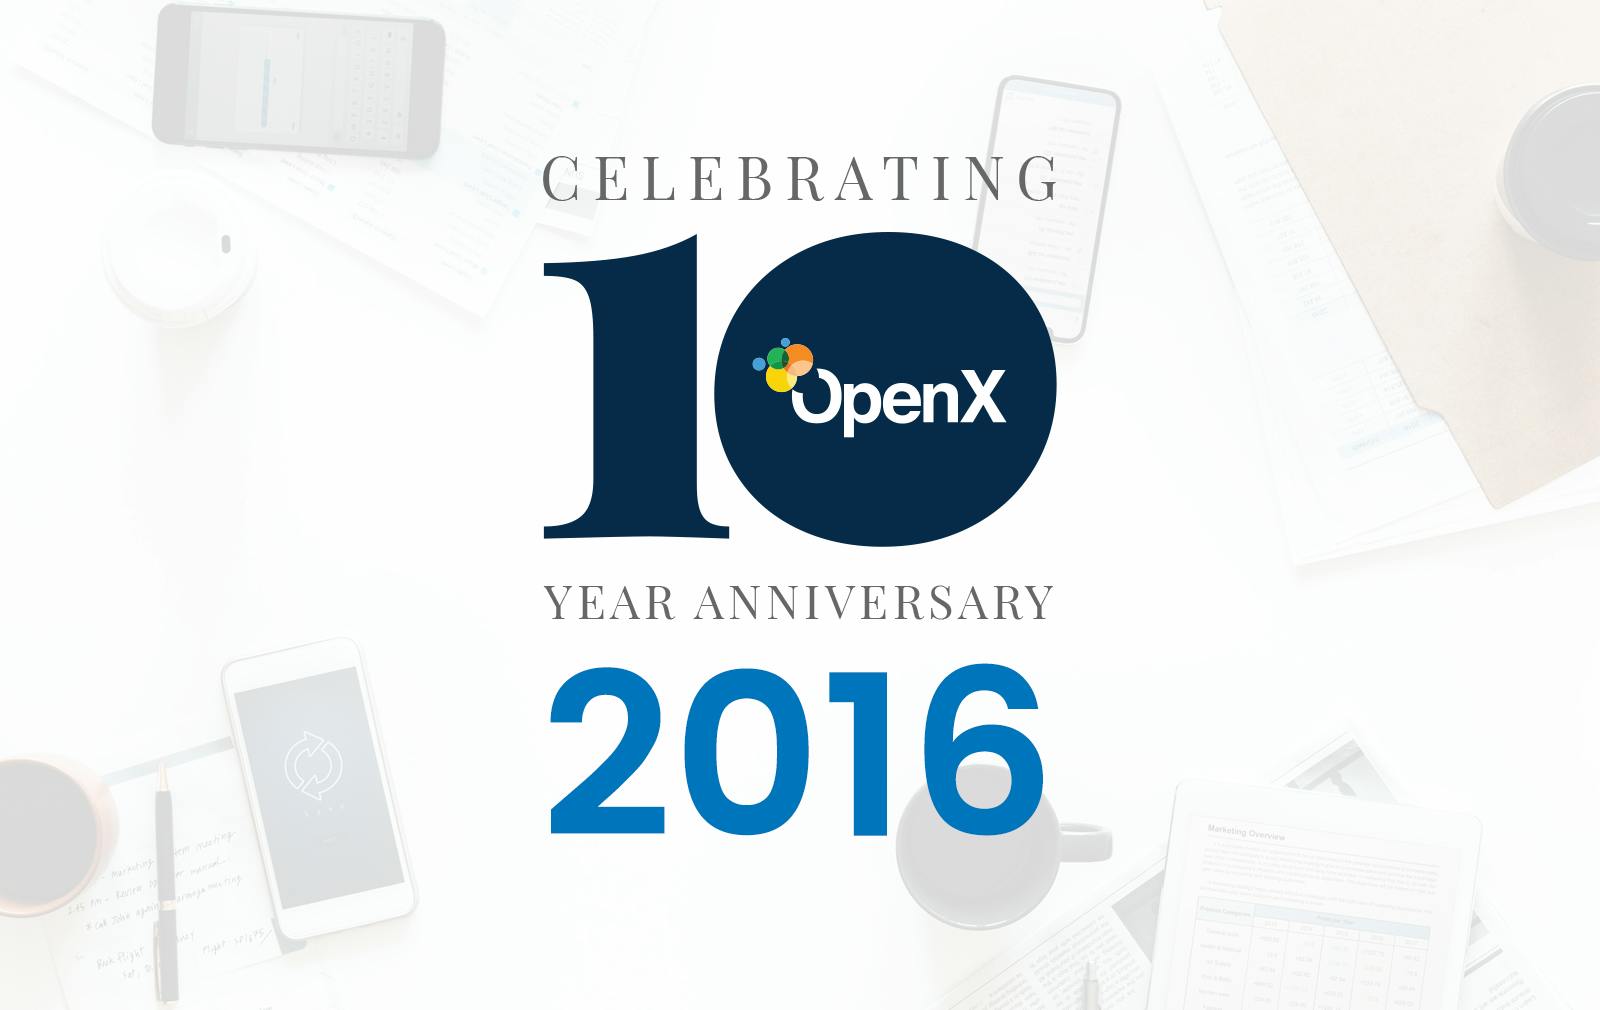 OpenX in 2016 (part 9 of 10)